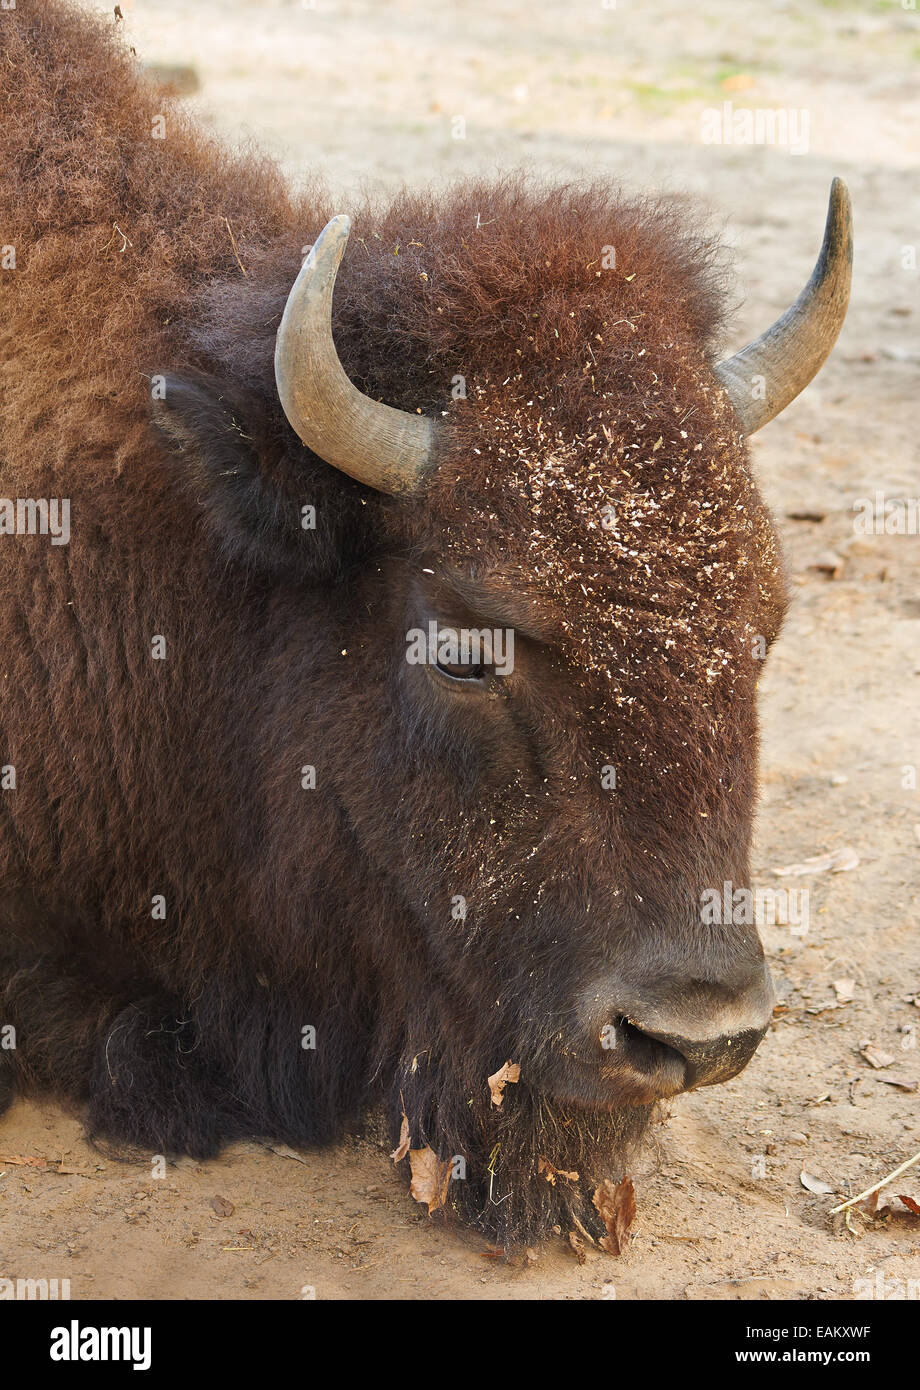 head of big brown bison laying on sand Stock Photo